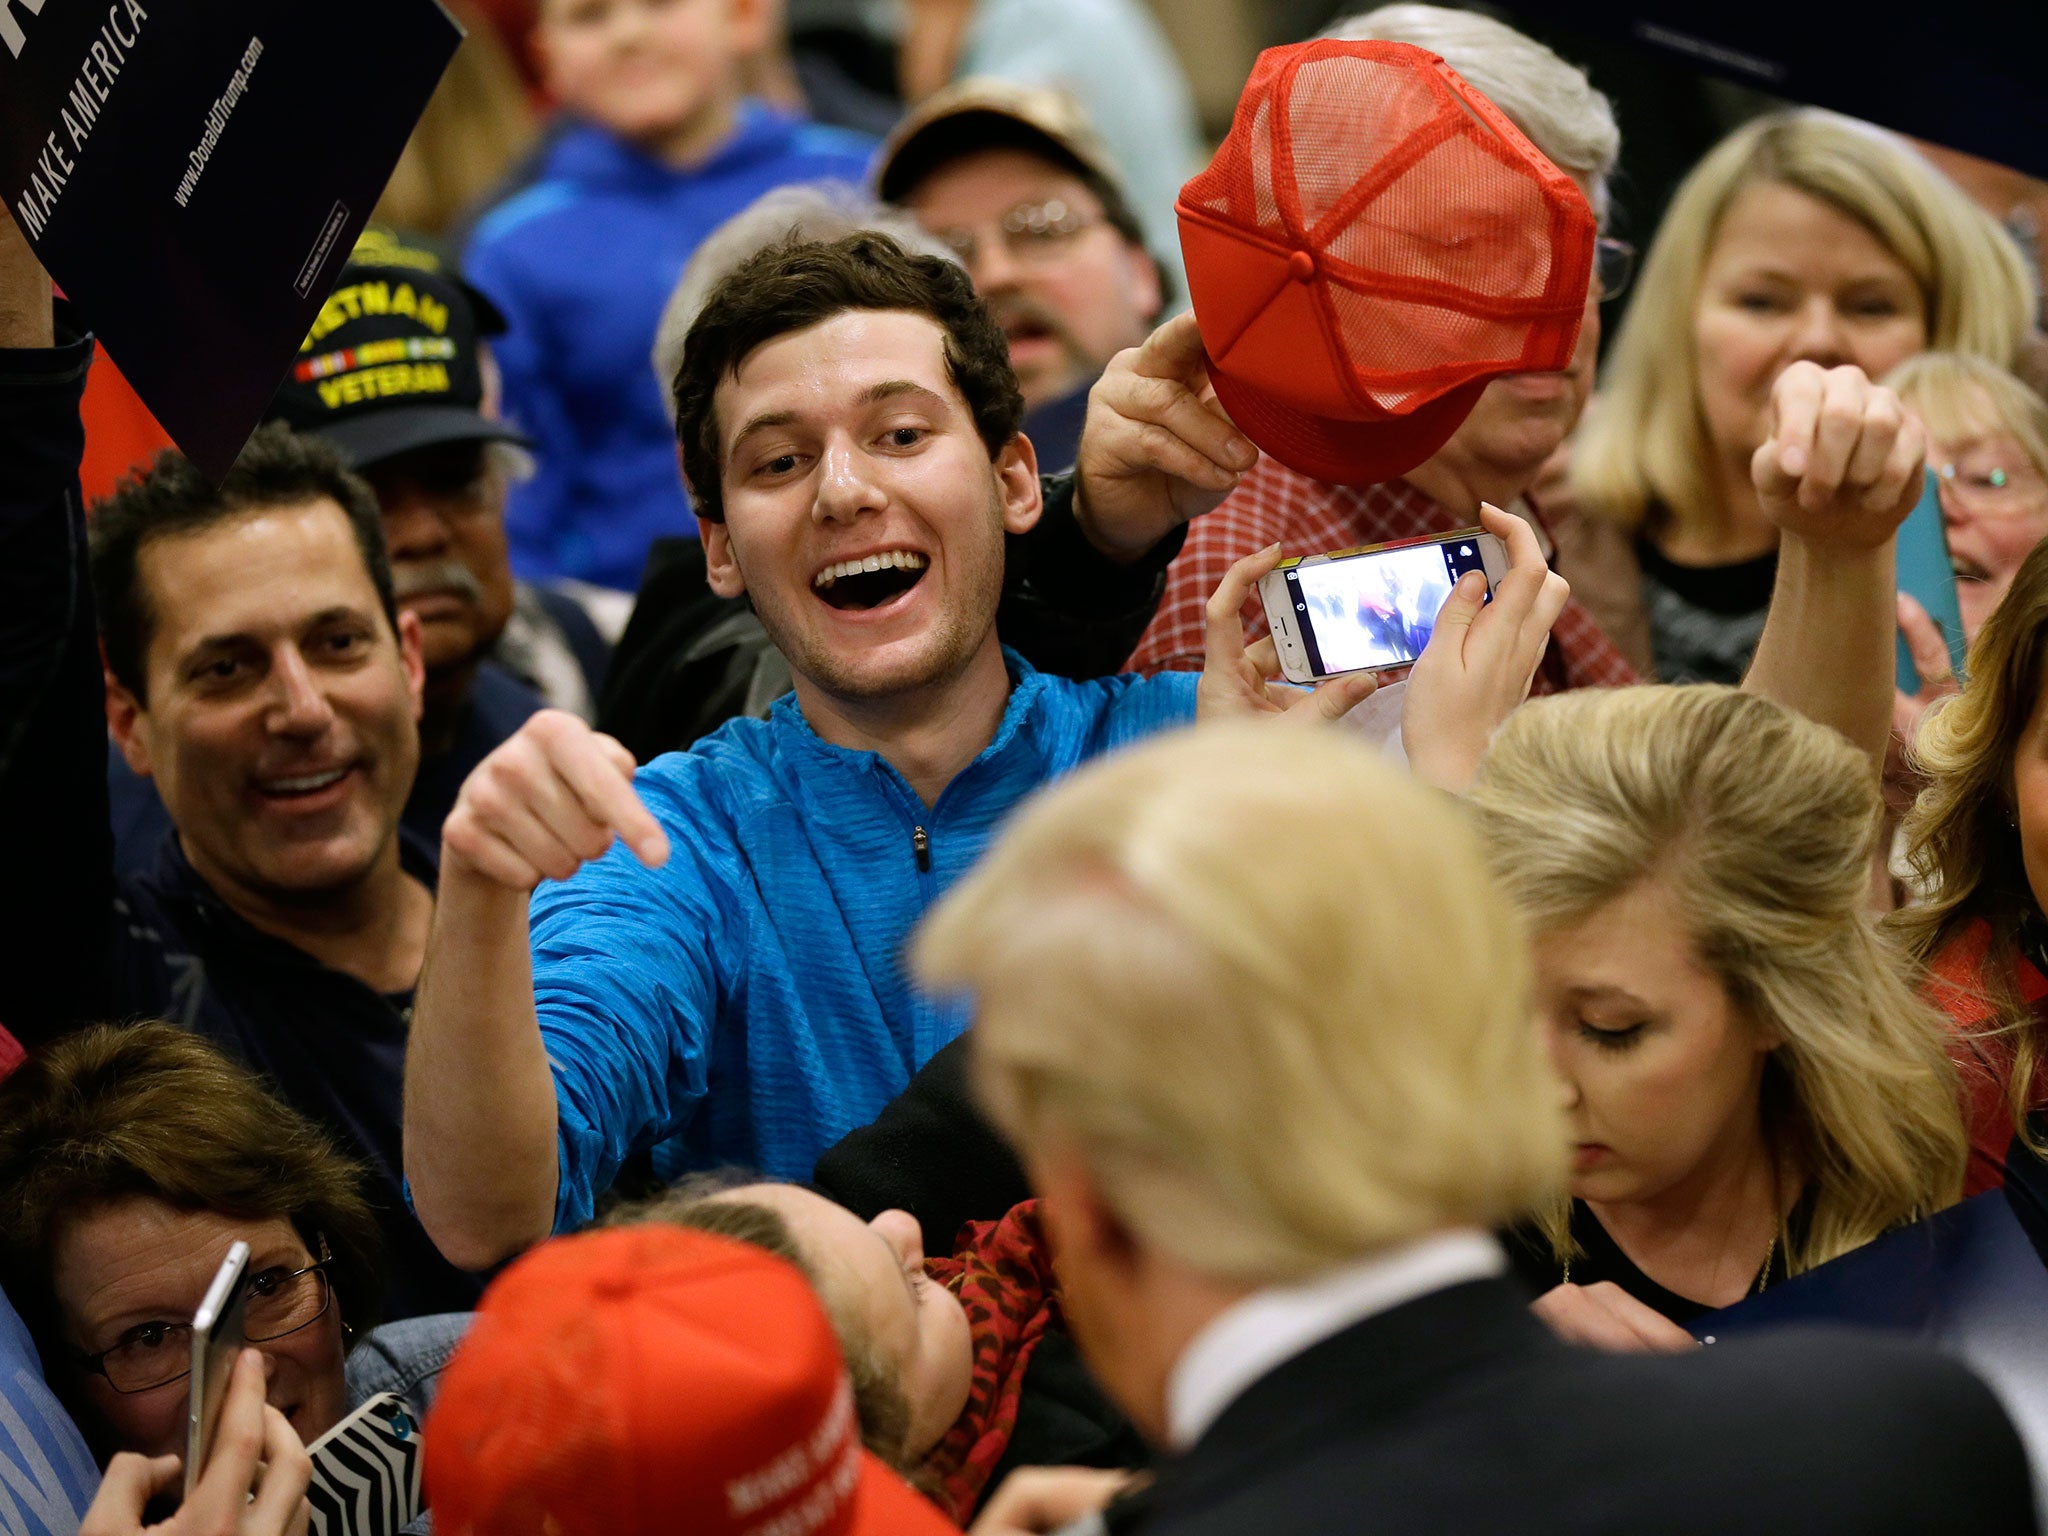 Supporters rush to meet Mr Trump at a rally in Clinton, Iowa